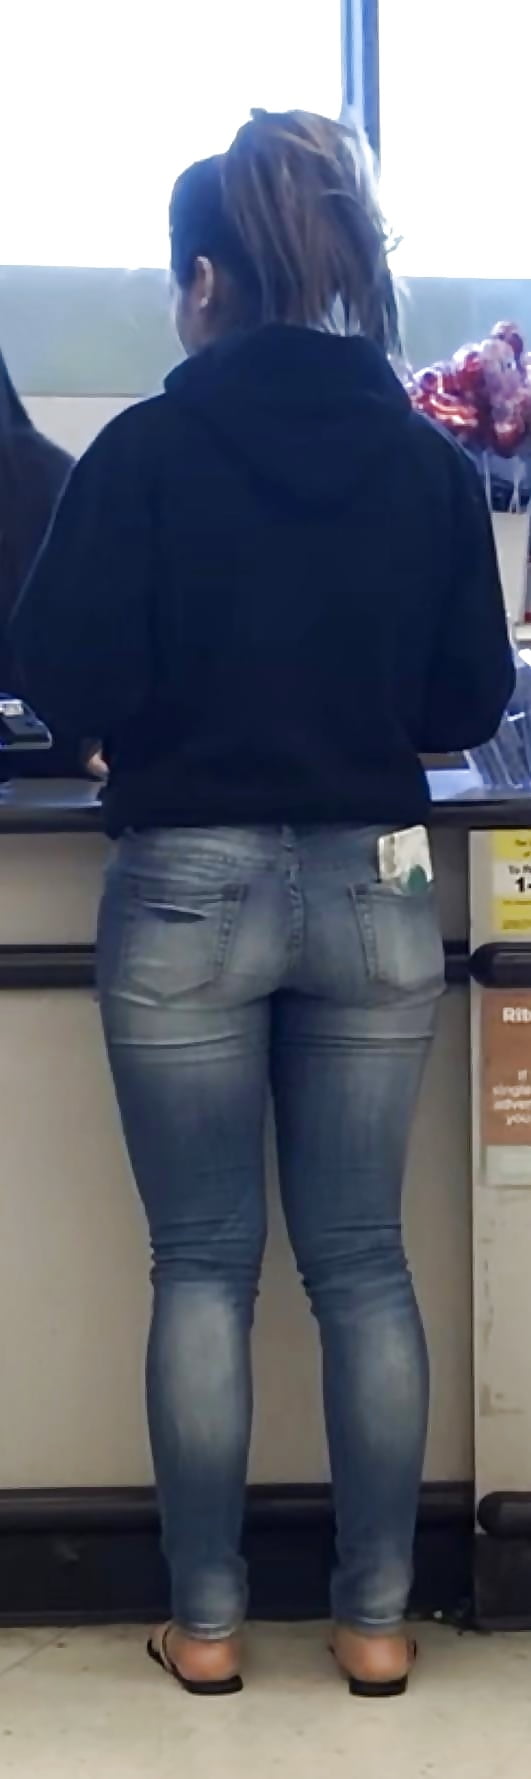 She_caught_me_taking_pics_of_her_nice_ass_in_jeans (1/6)